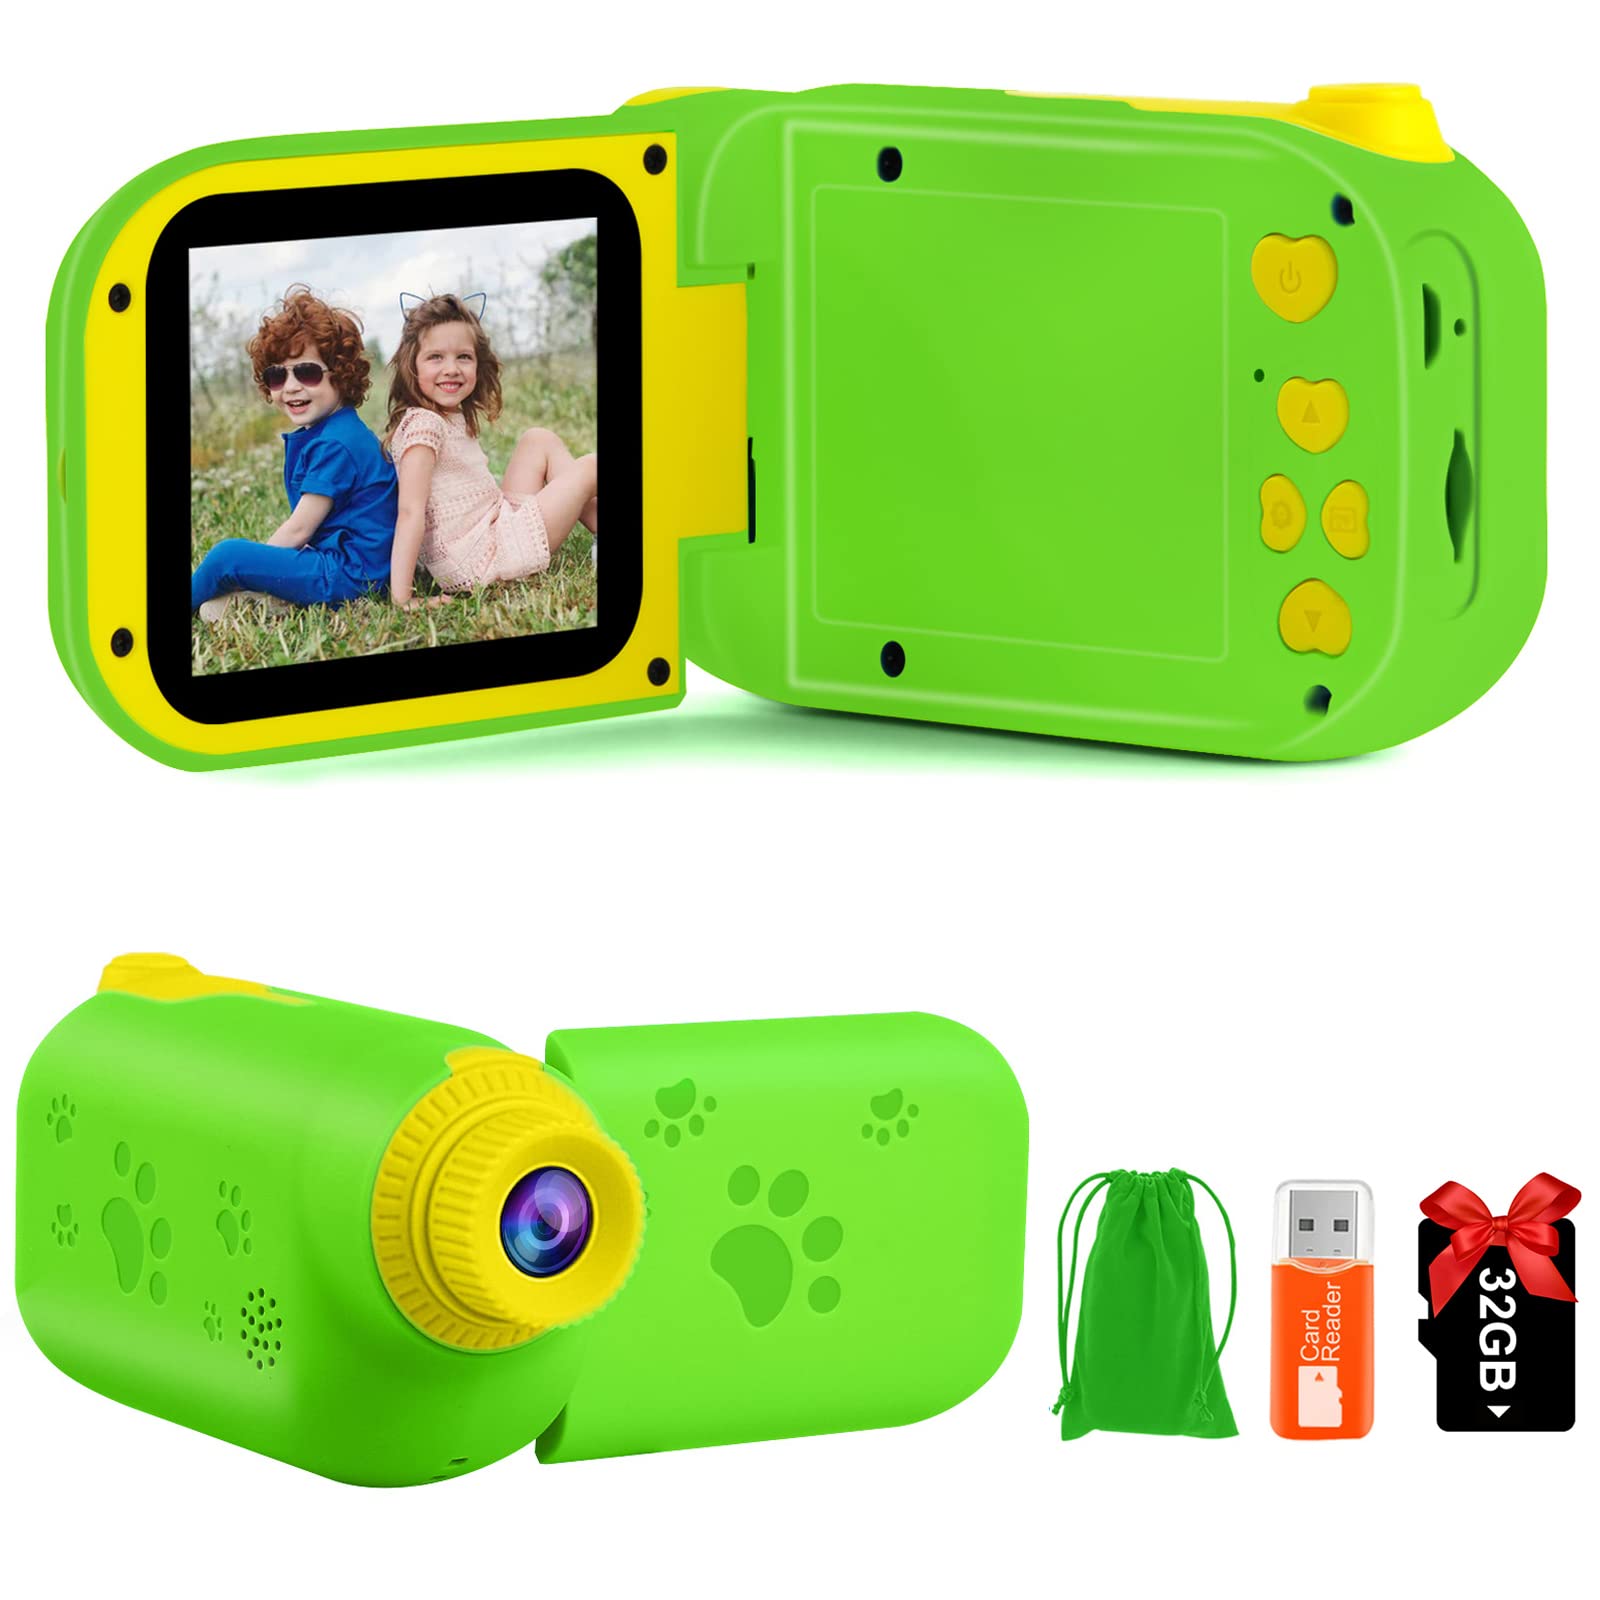 AILEHO Kids Camera for Kids Camera-Kids Video Camera-Kids Digital Camera-Kids Camcorder-Children Digital Camera Toddler Camera 12M 1080P Kids Video Recorder for Birthday Gift and Christmas Toy Green